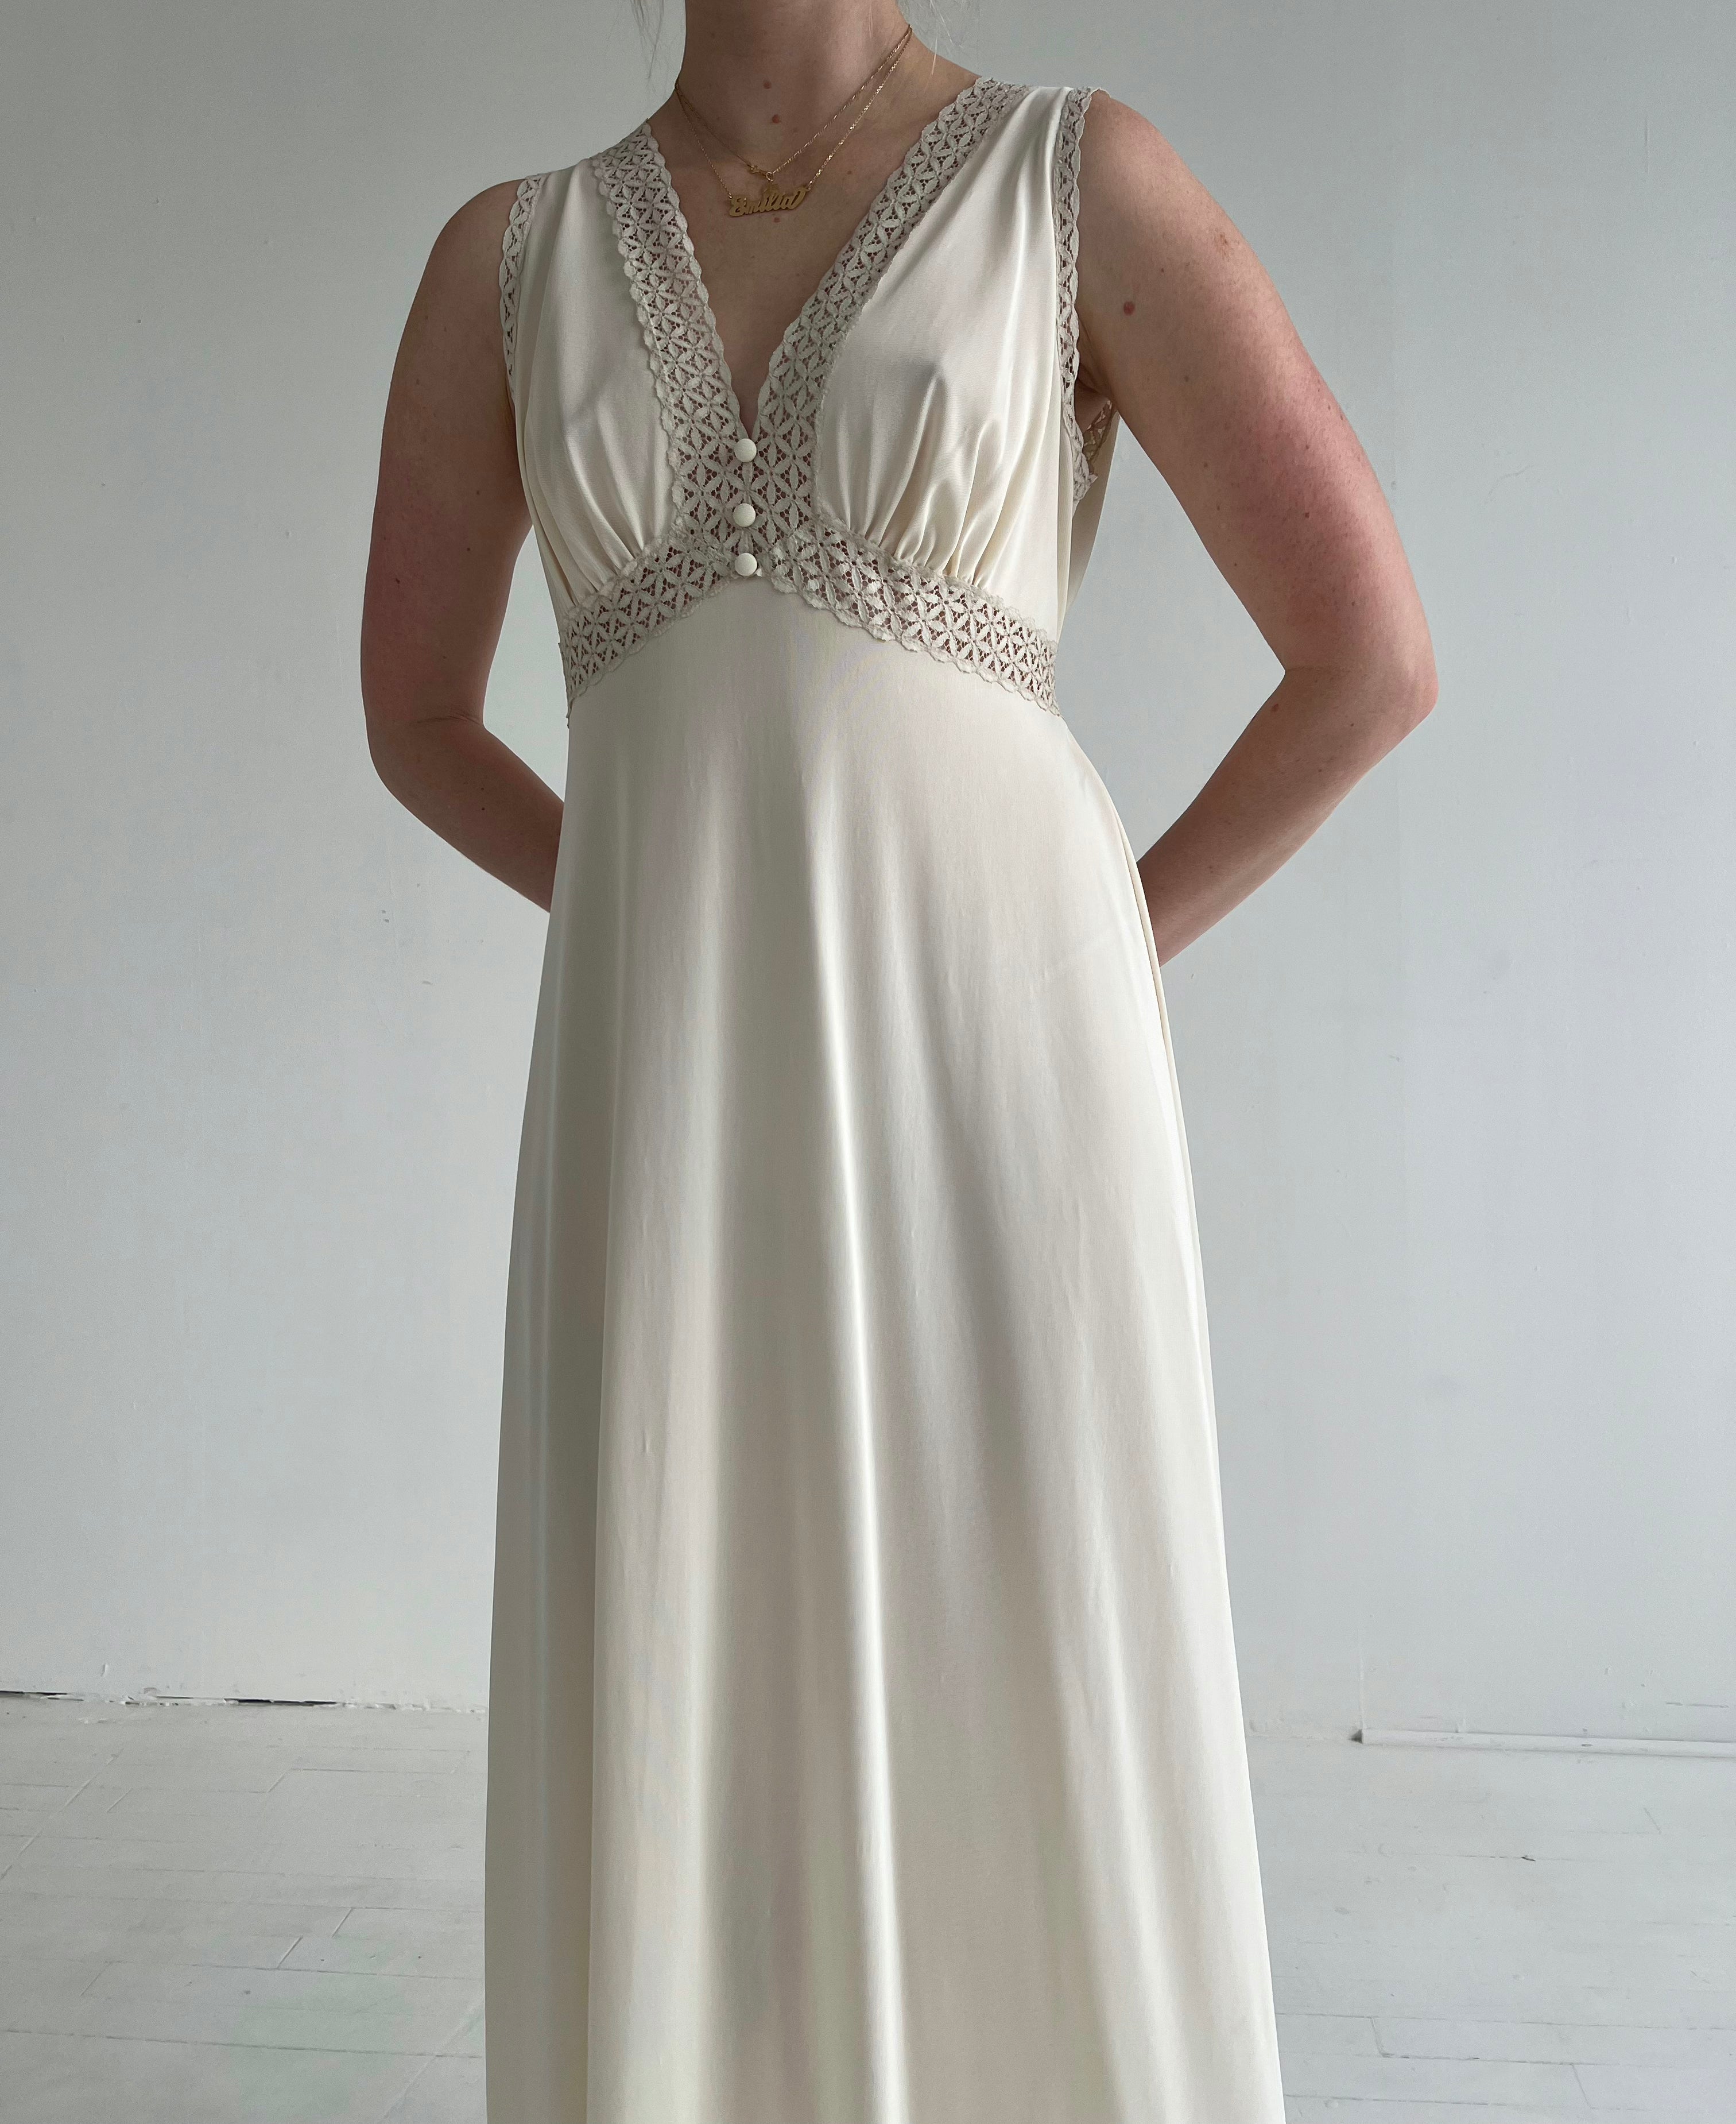 1950's Off White Slip Dress with Lace